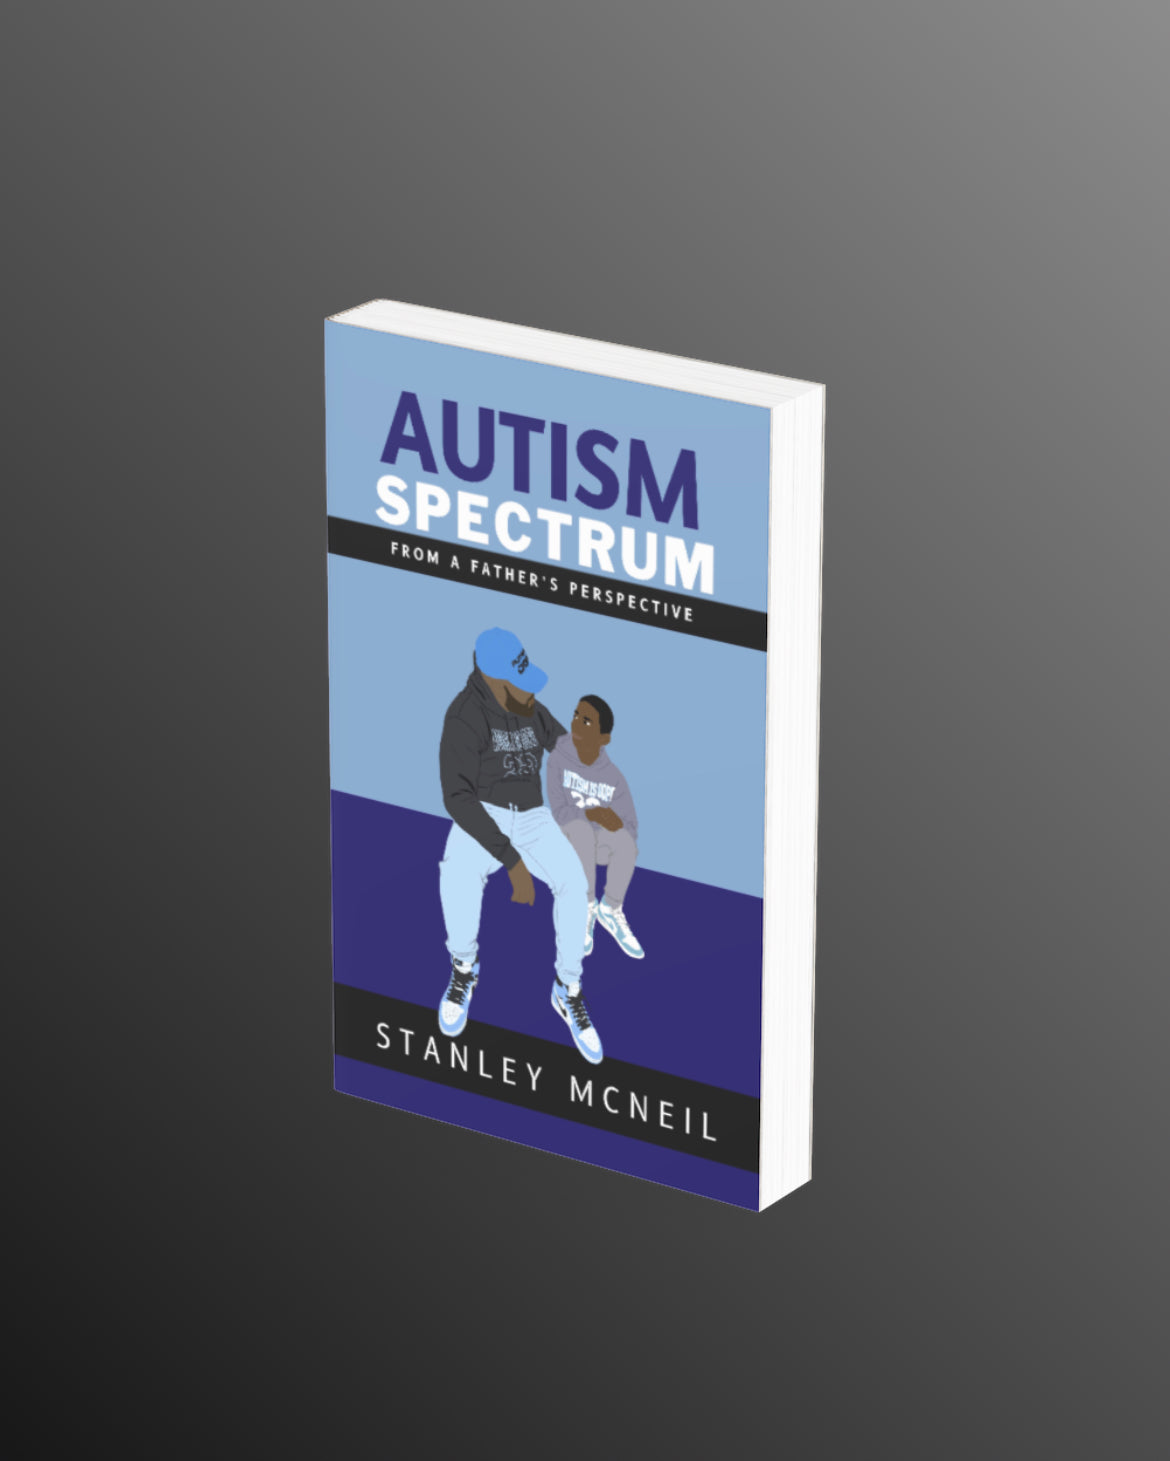 Copy of Autism Spectrum from a Father’s Perspective HARDCOVER